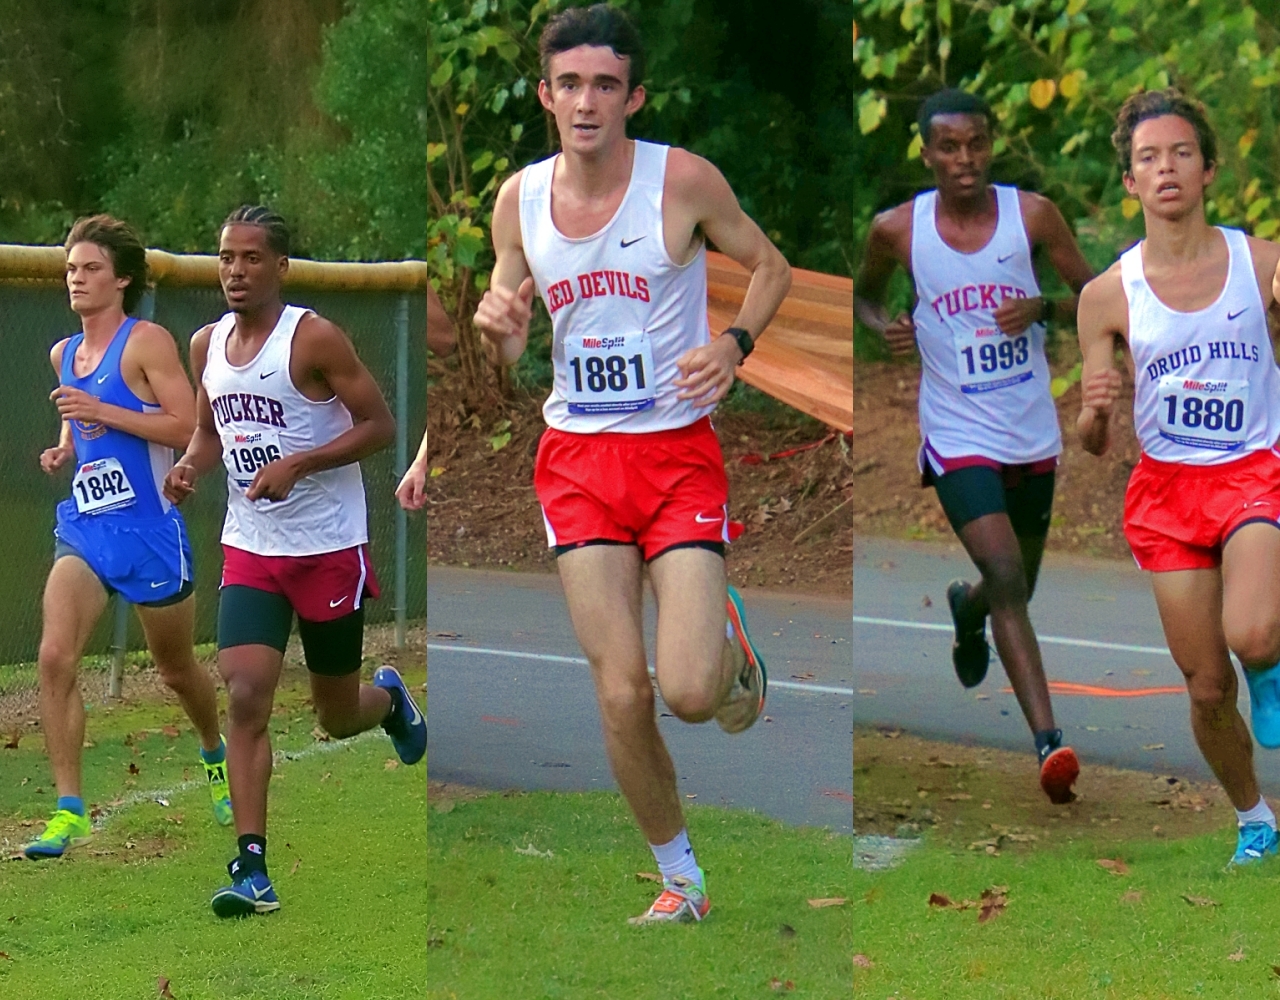 Druid Hills Sage Walker (middle photo) clocked a DeKalb County season's best of 16:46.85 to win the individual boys' gold medal. (Photos by Mark Brock)